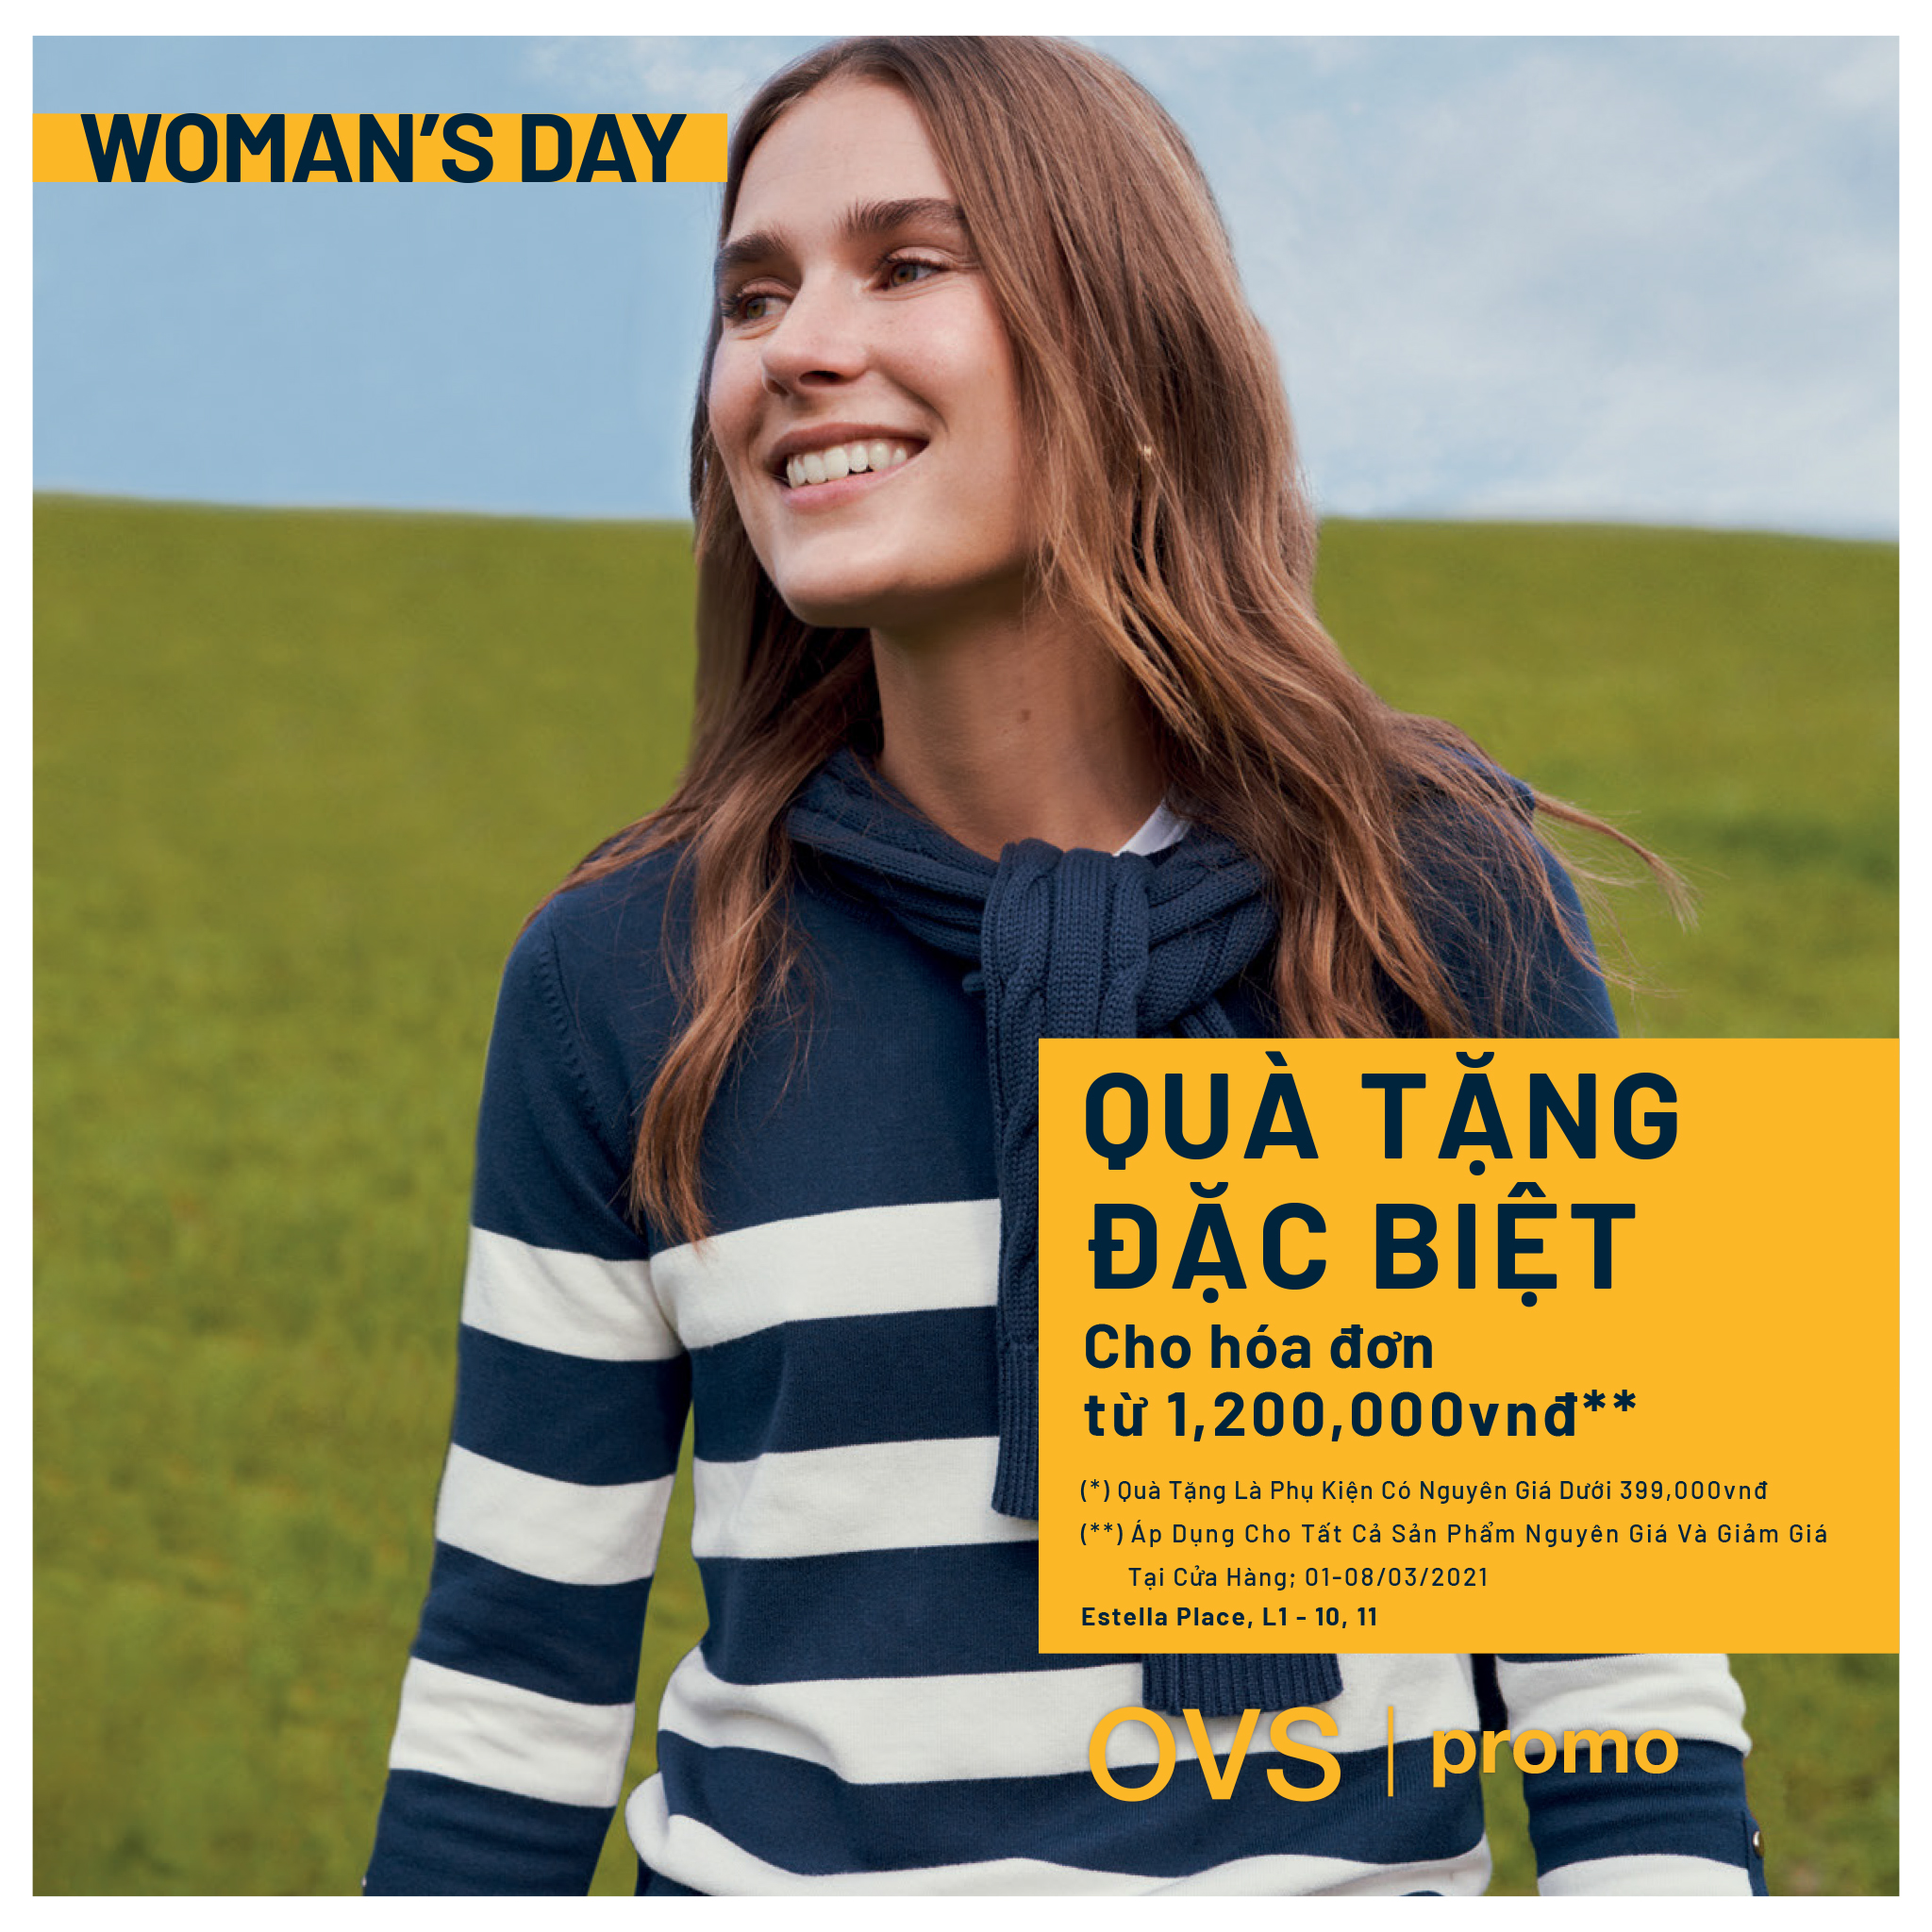 HAPPY WOMEN’S DAY FROM OVS